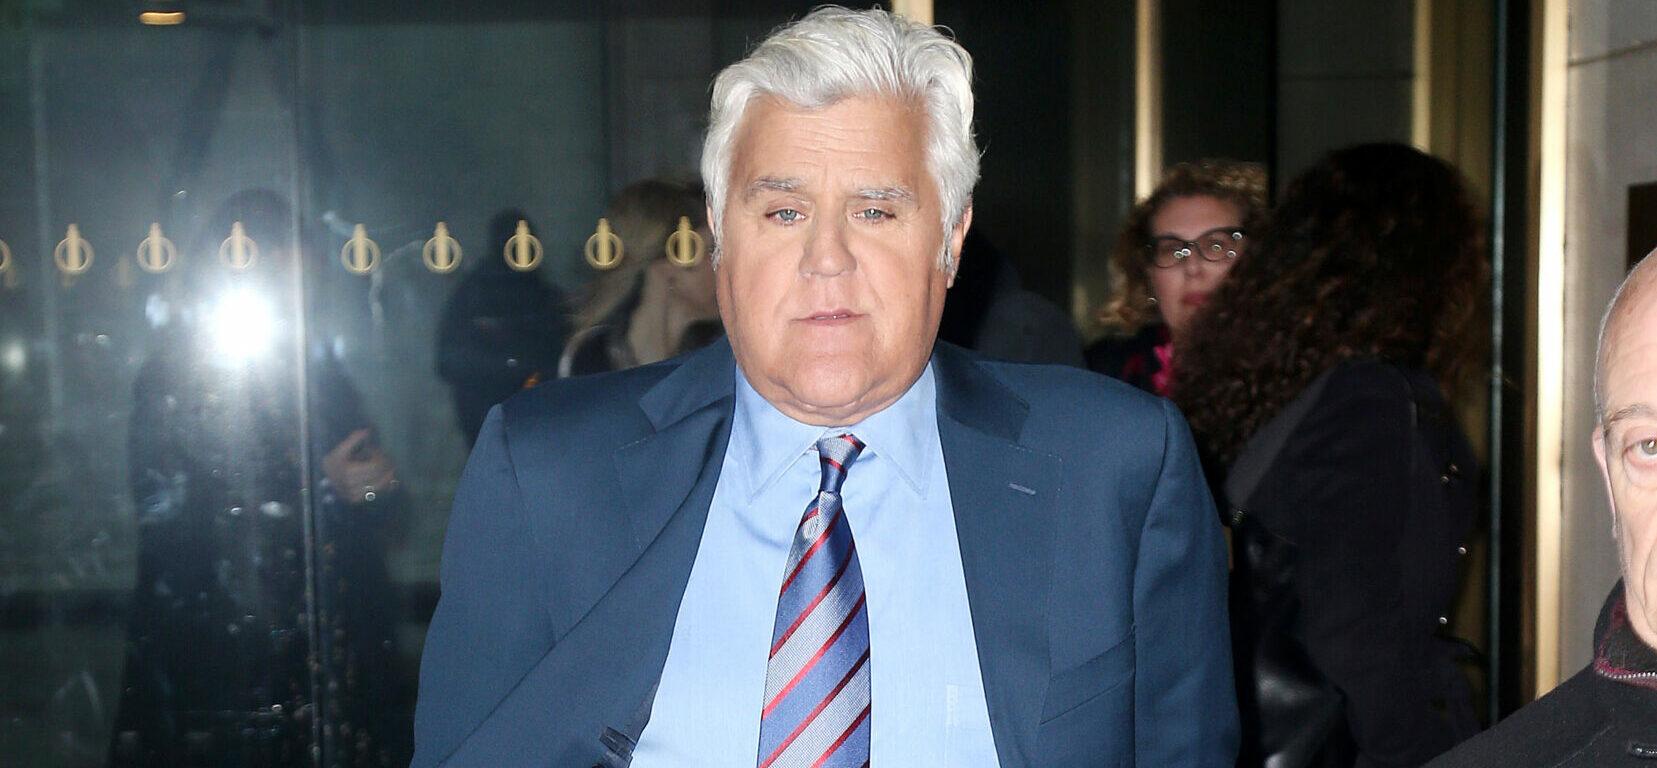 Jay Leno at Today Show in New York